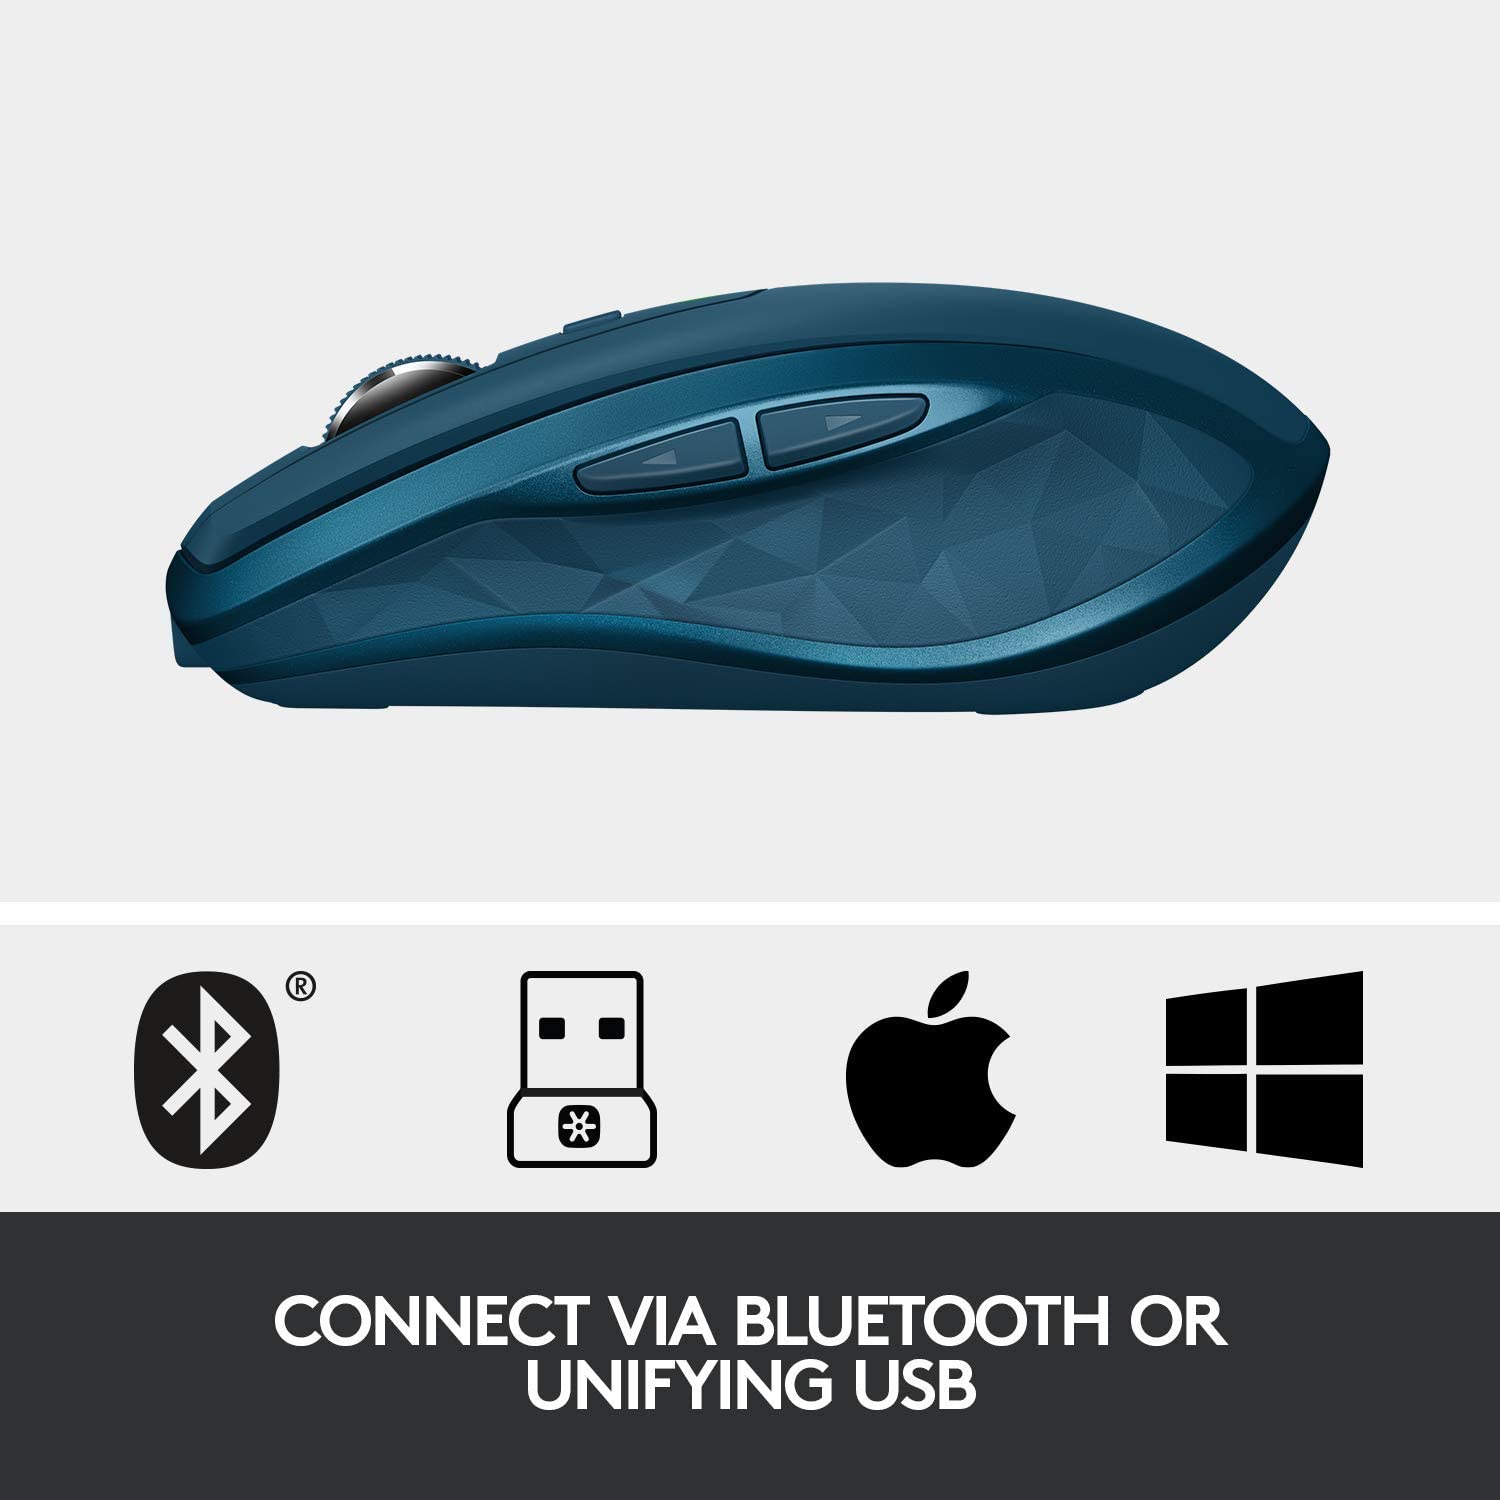 logitech mx master 2s wireless mouse with cross-computer control for mac and windows, midnight teal